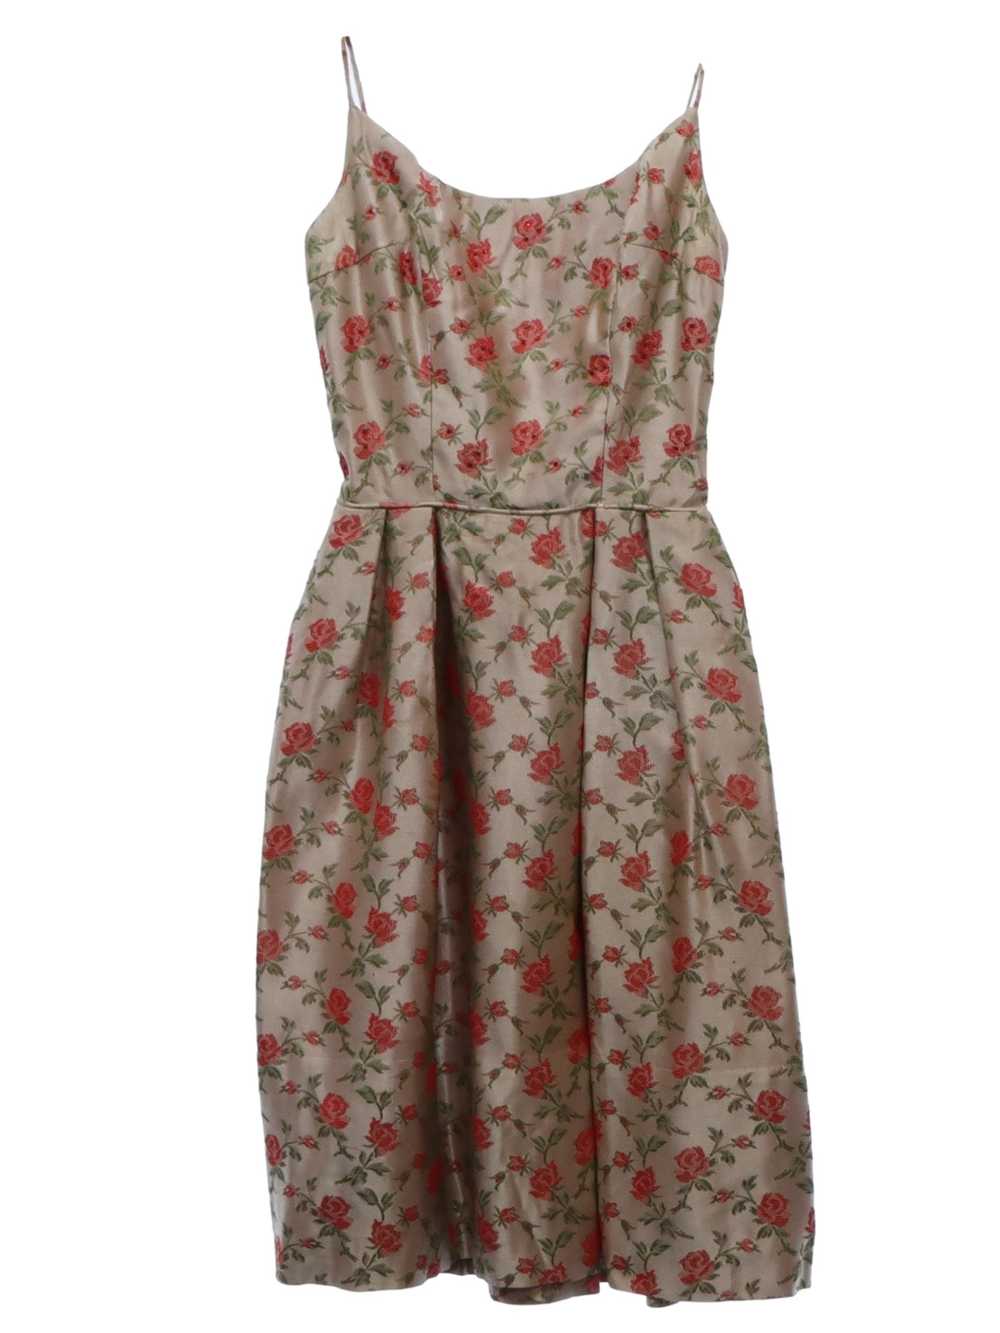 1960's or Girls Cocktail Dress - image 1